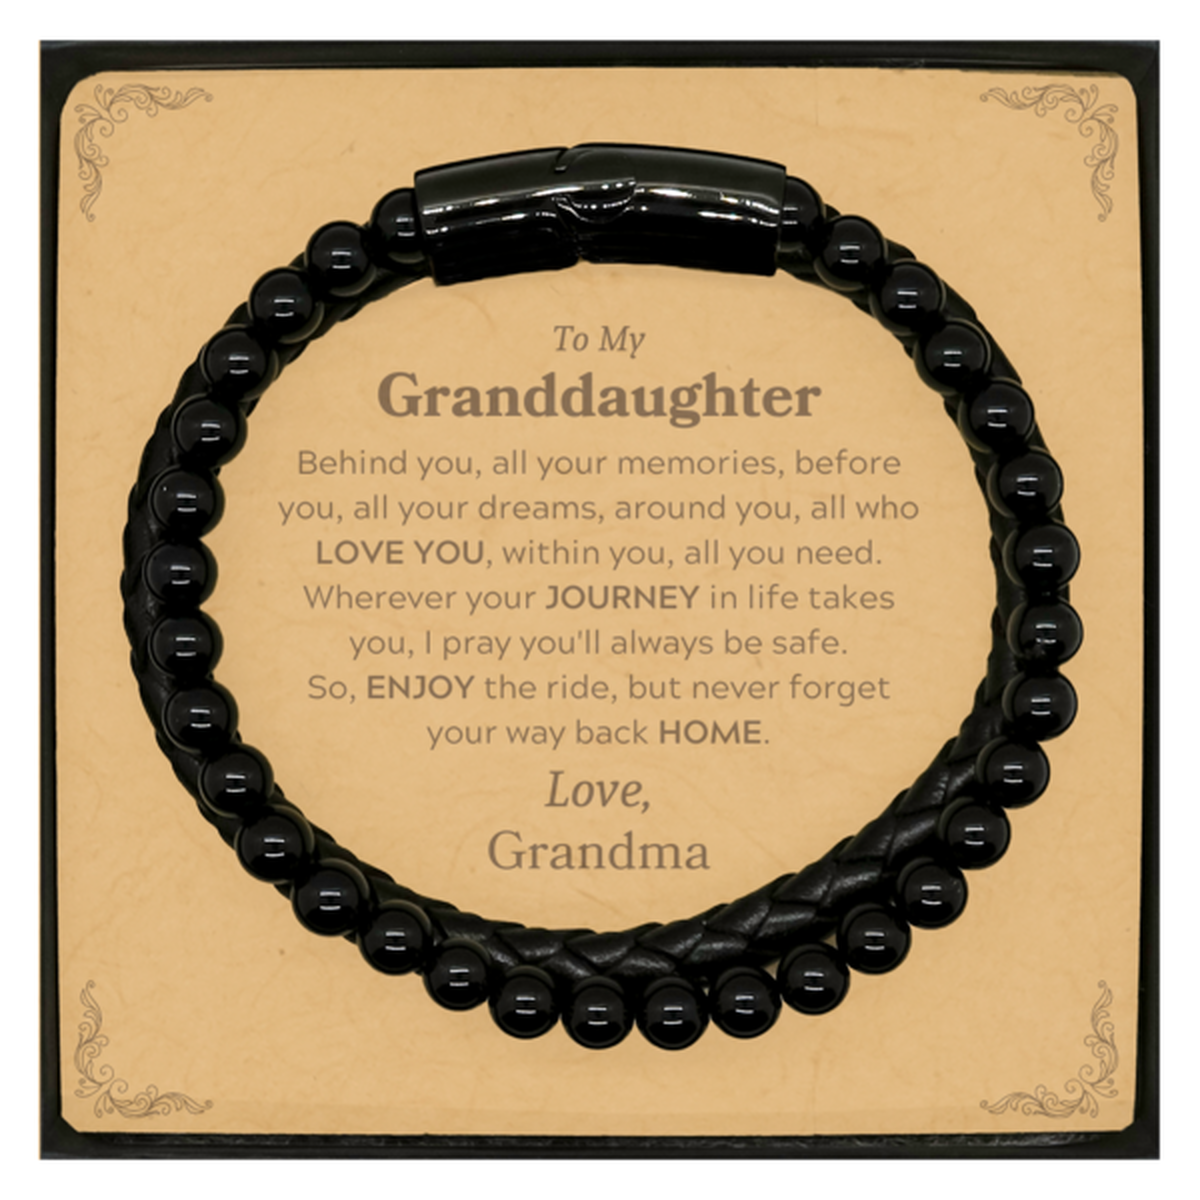 To My Granddaughter Graduation Gifts from Grandma, Granddaughter Stone Leather Bracelets Christmas Birthday Gifts for Granddaughter Behind you, all your memories, before you, all your dreams. Love, Grandma